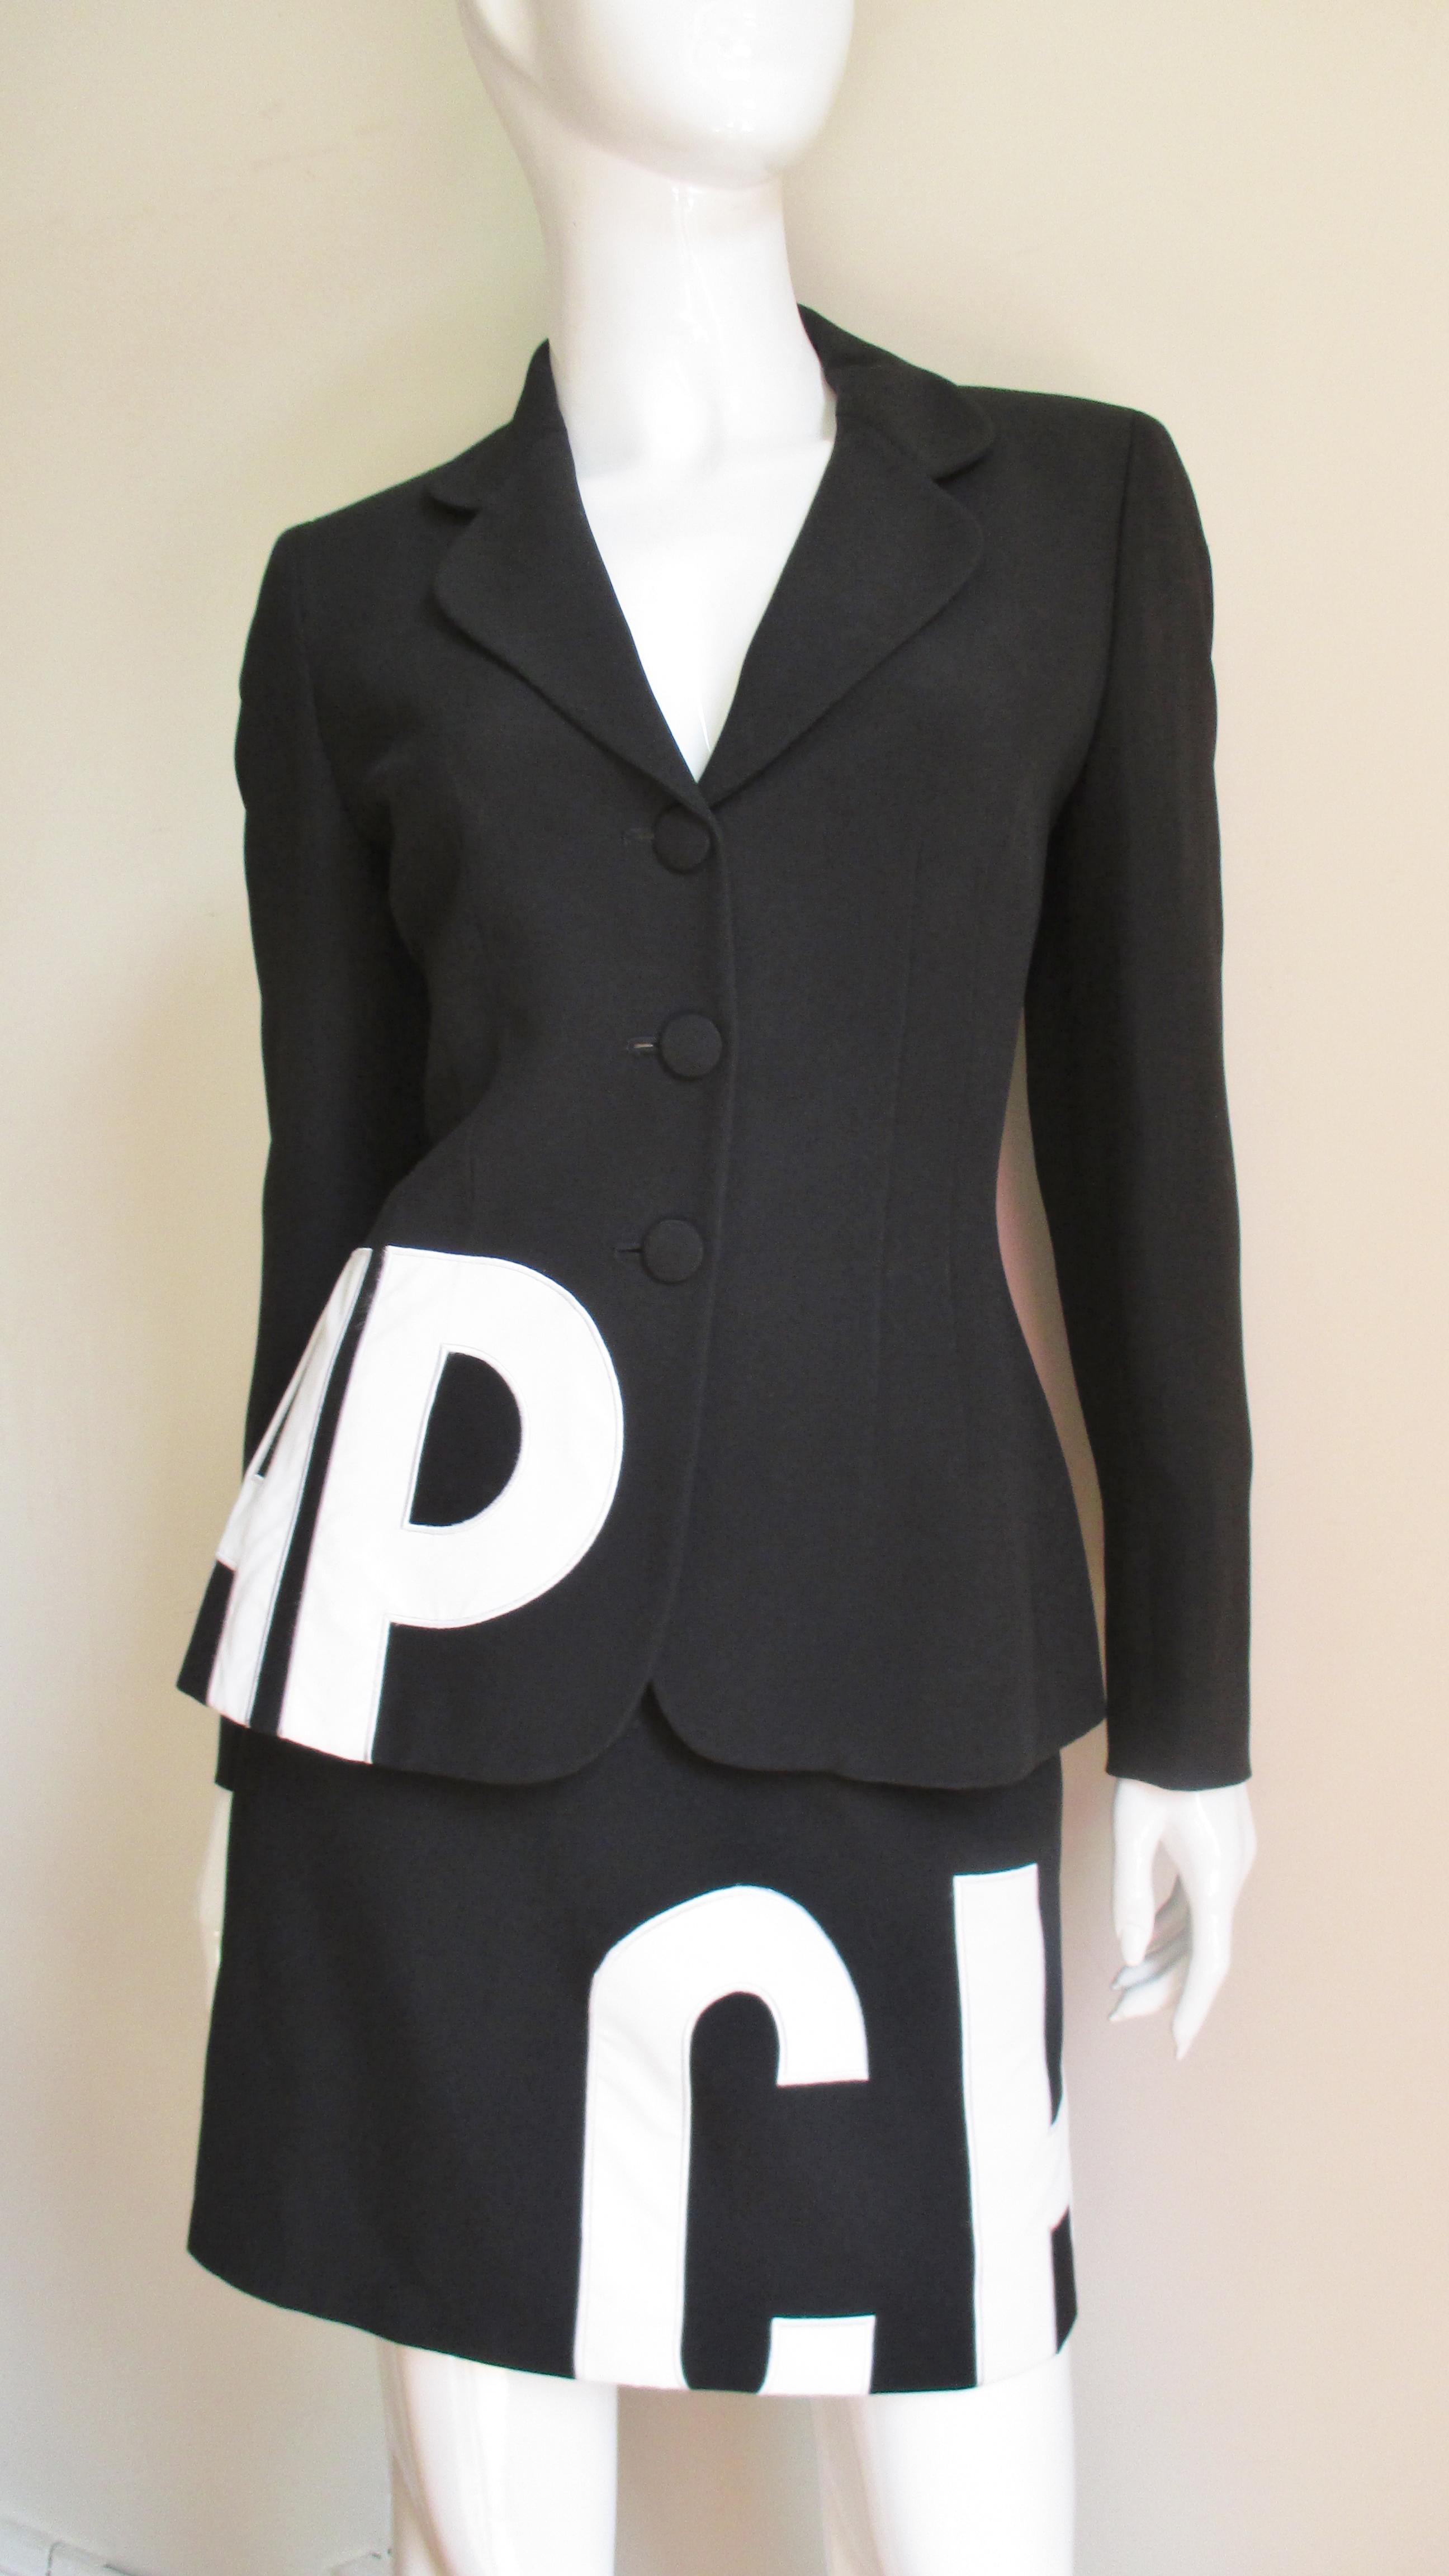 A fabulous skirt suit from Moschino in black and white. The blazer style jacket is semi fitted with rounded lapels and closing with 3 self covered buttons in front and three self covered buttons at each cuff.  It has the word CHEAP appliqued in